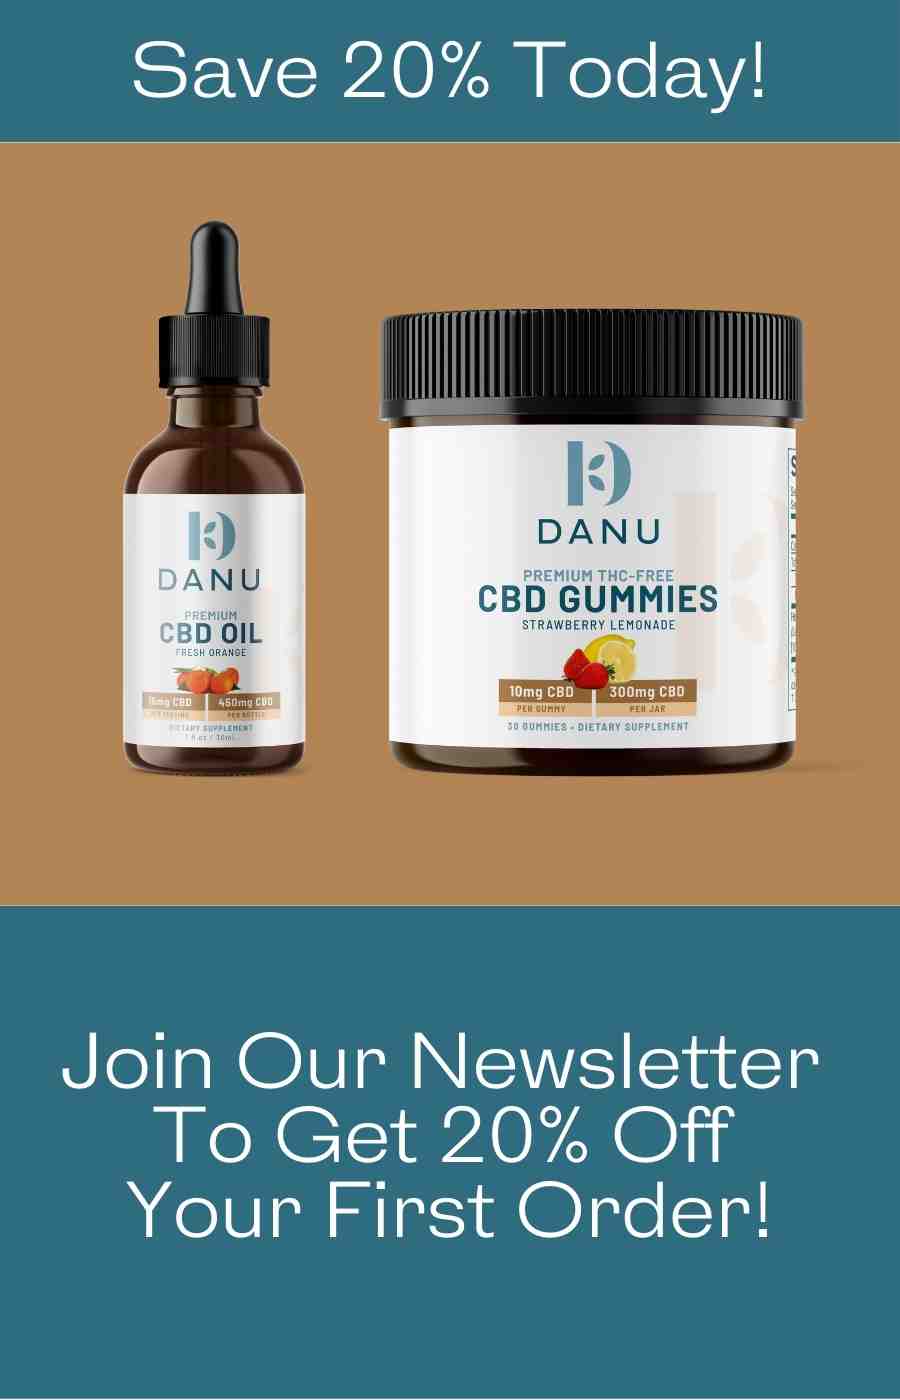 sign up for our newsletter and save 20% on your first order | Danu